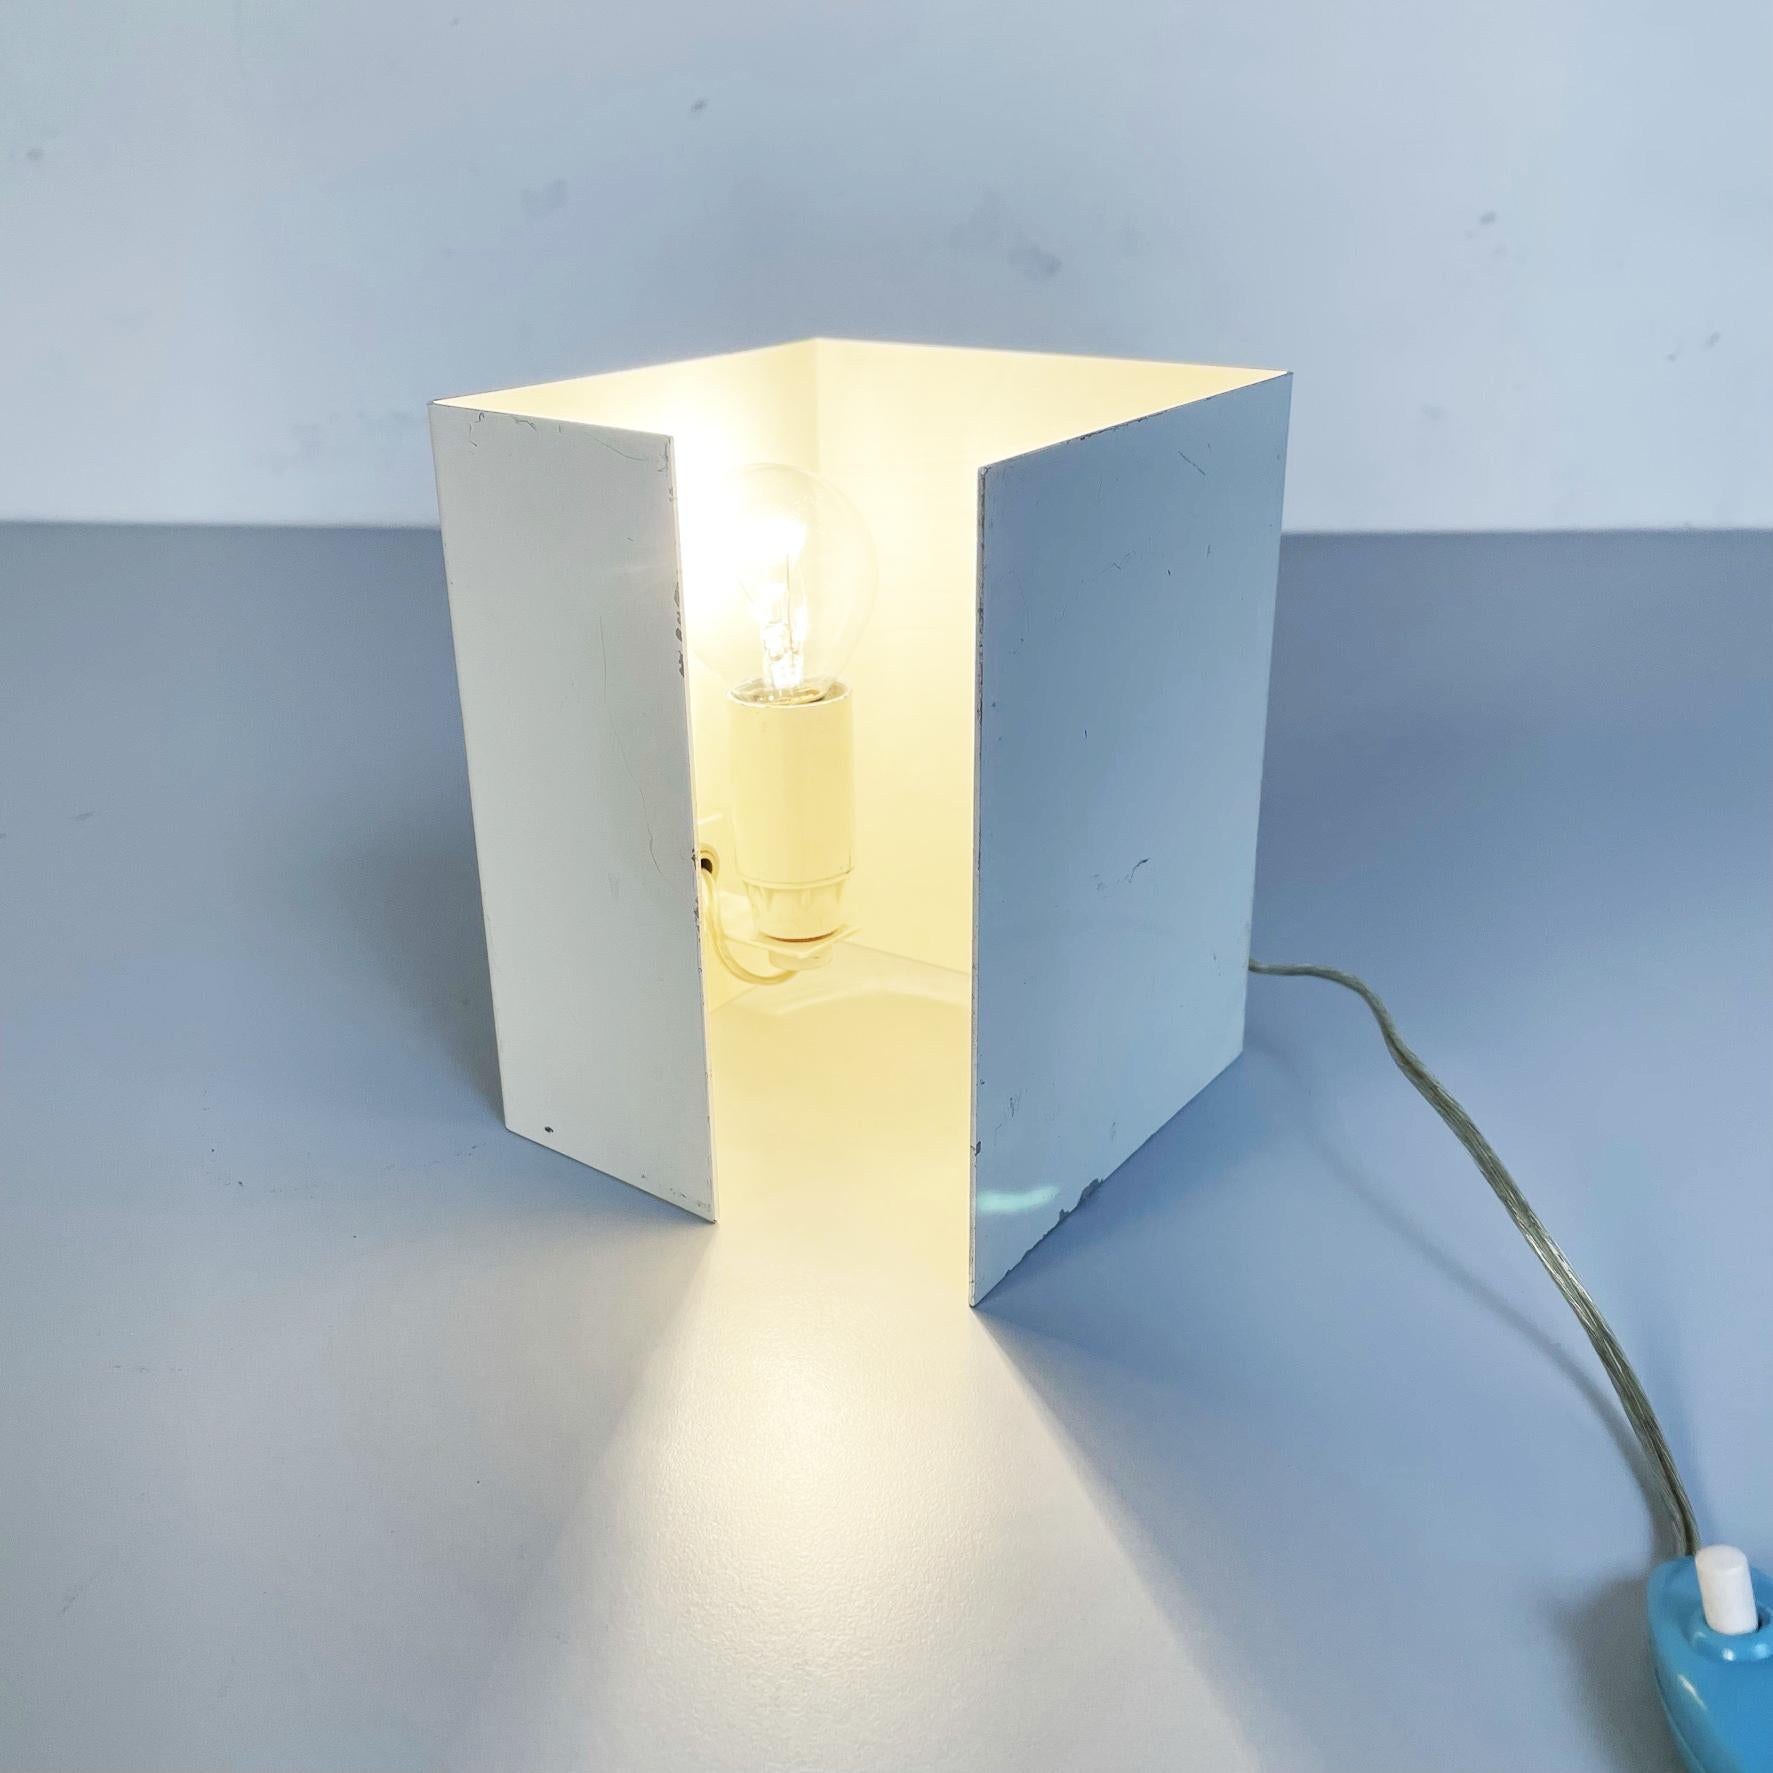 Italian Mid-Century Modern white sheet metal table lamp, 1970s
Table lamp composed of a sheet metal painted in white.
1970s
Good conditions.
Measurements in cm 11.5 × 11.5 x 15 H
Available in different colors.